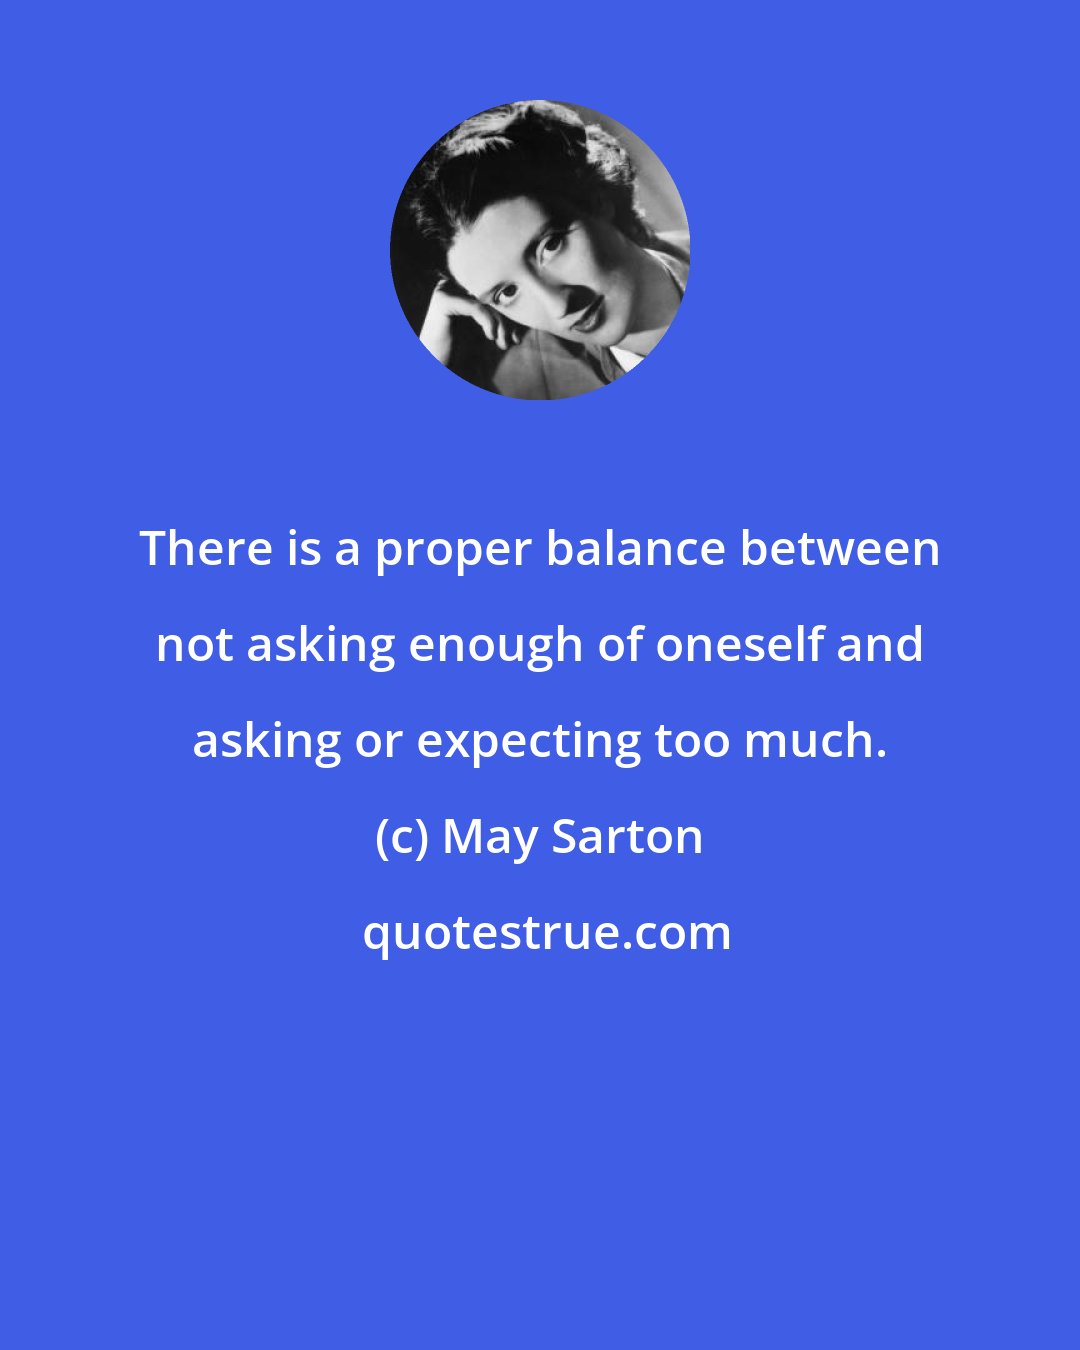 May Sarton: There is a proper balance between not asking enough of oneself and asking or expecting too much.